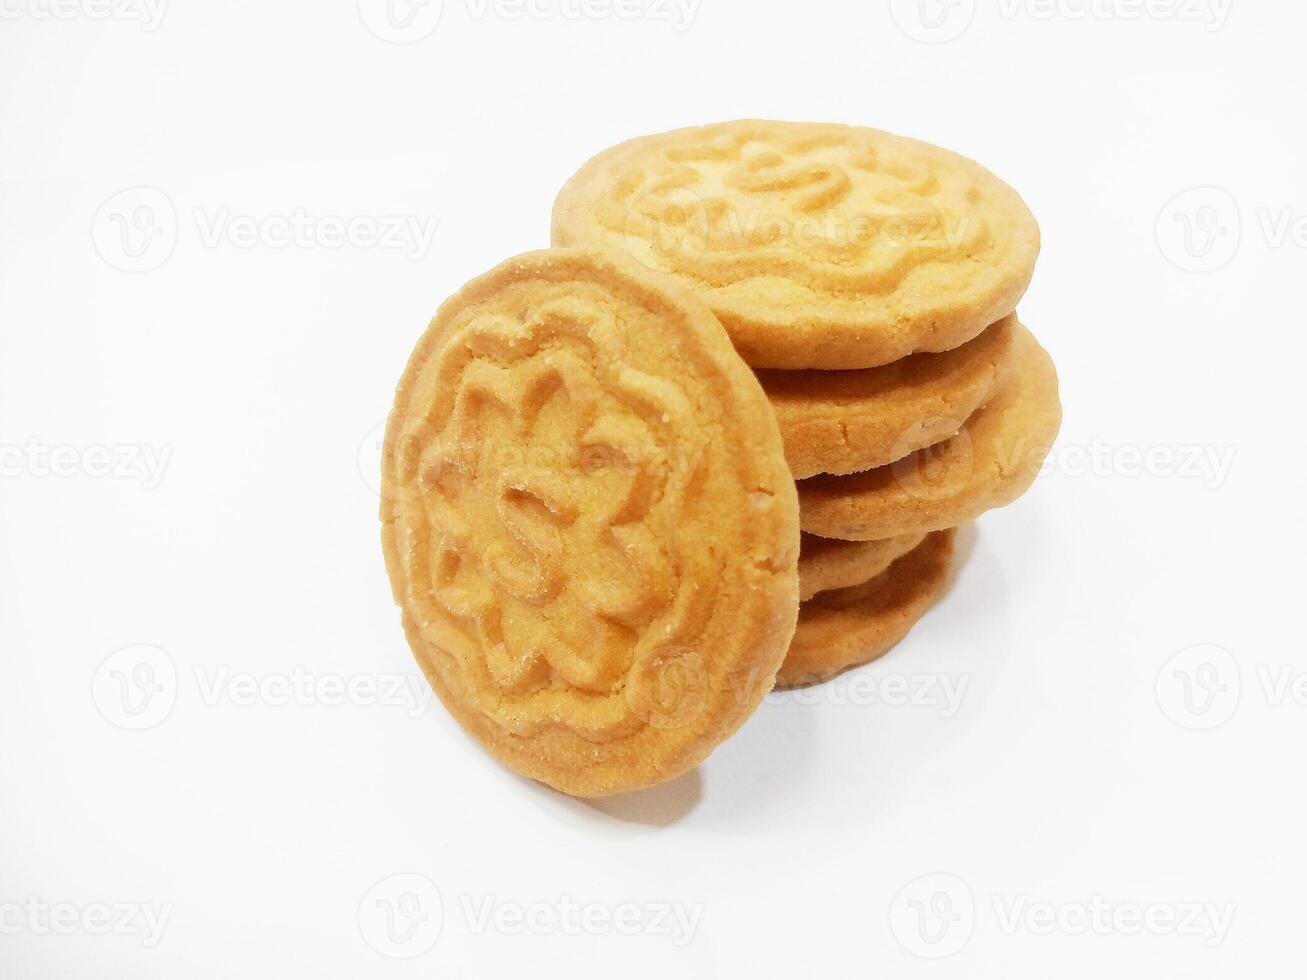 Wheat biscuits BISCUITS - A stack of delicious wheat round biscuits with a few crumbs isolated on white photo